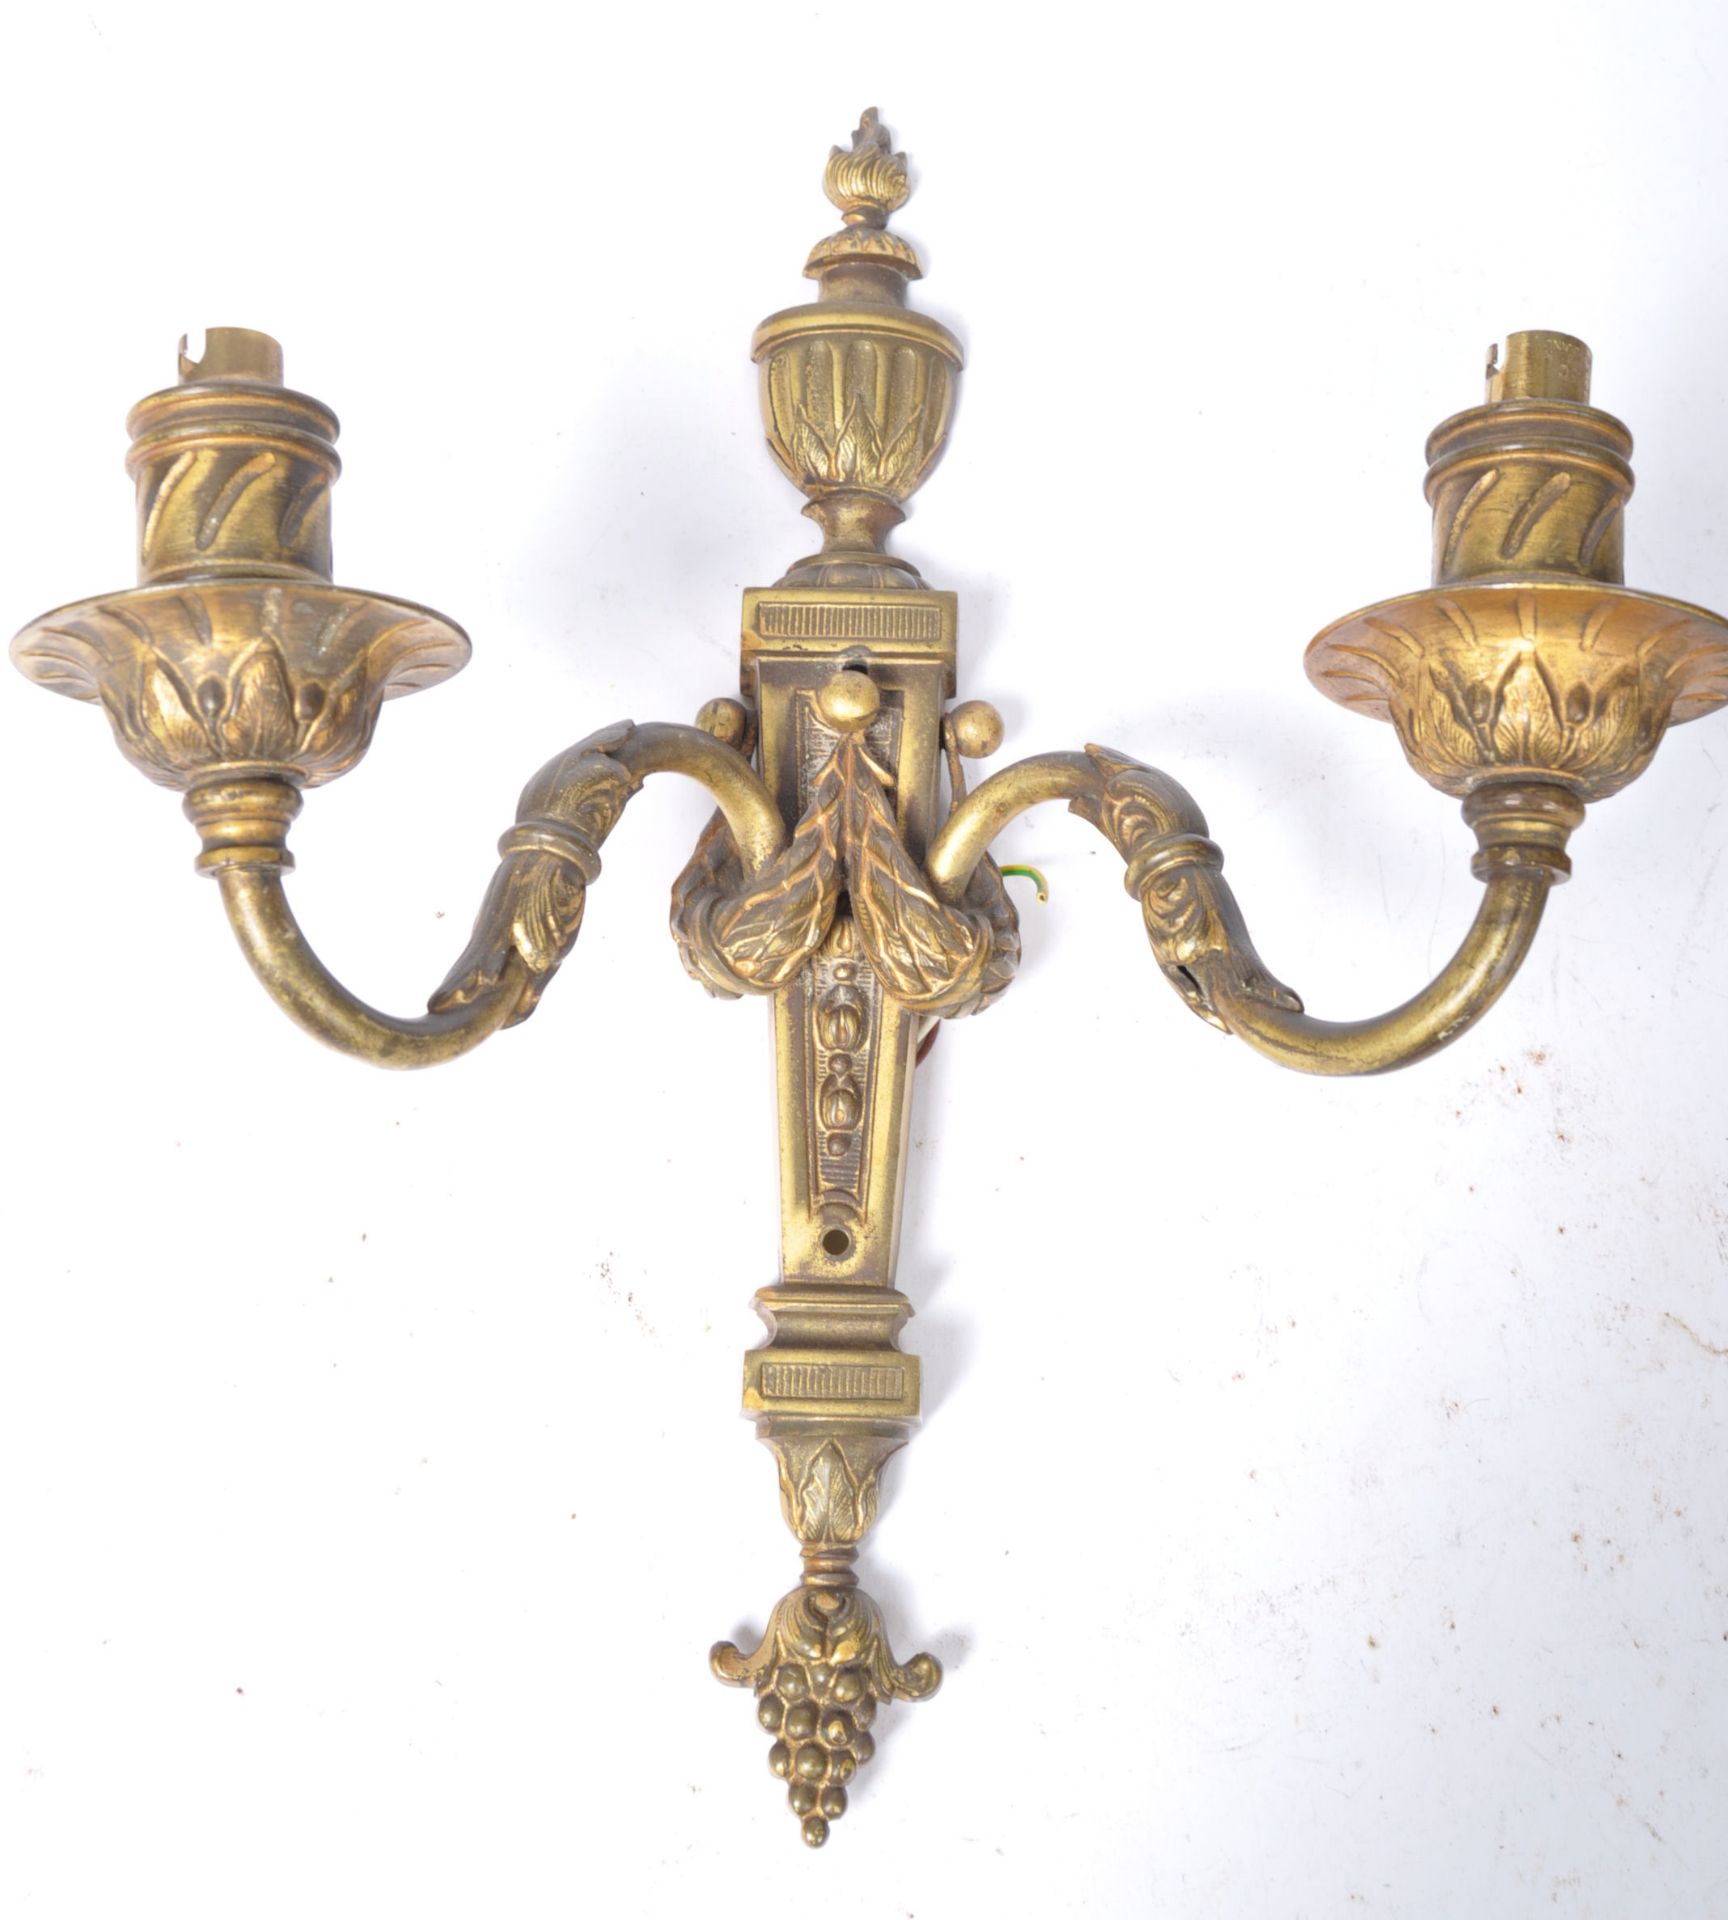 PAIR OF EDWARDIAN GILT BRONZE WALL LIGHTX IN THE ADAM STYLE - Image 3 of 5